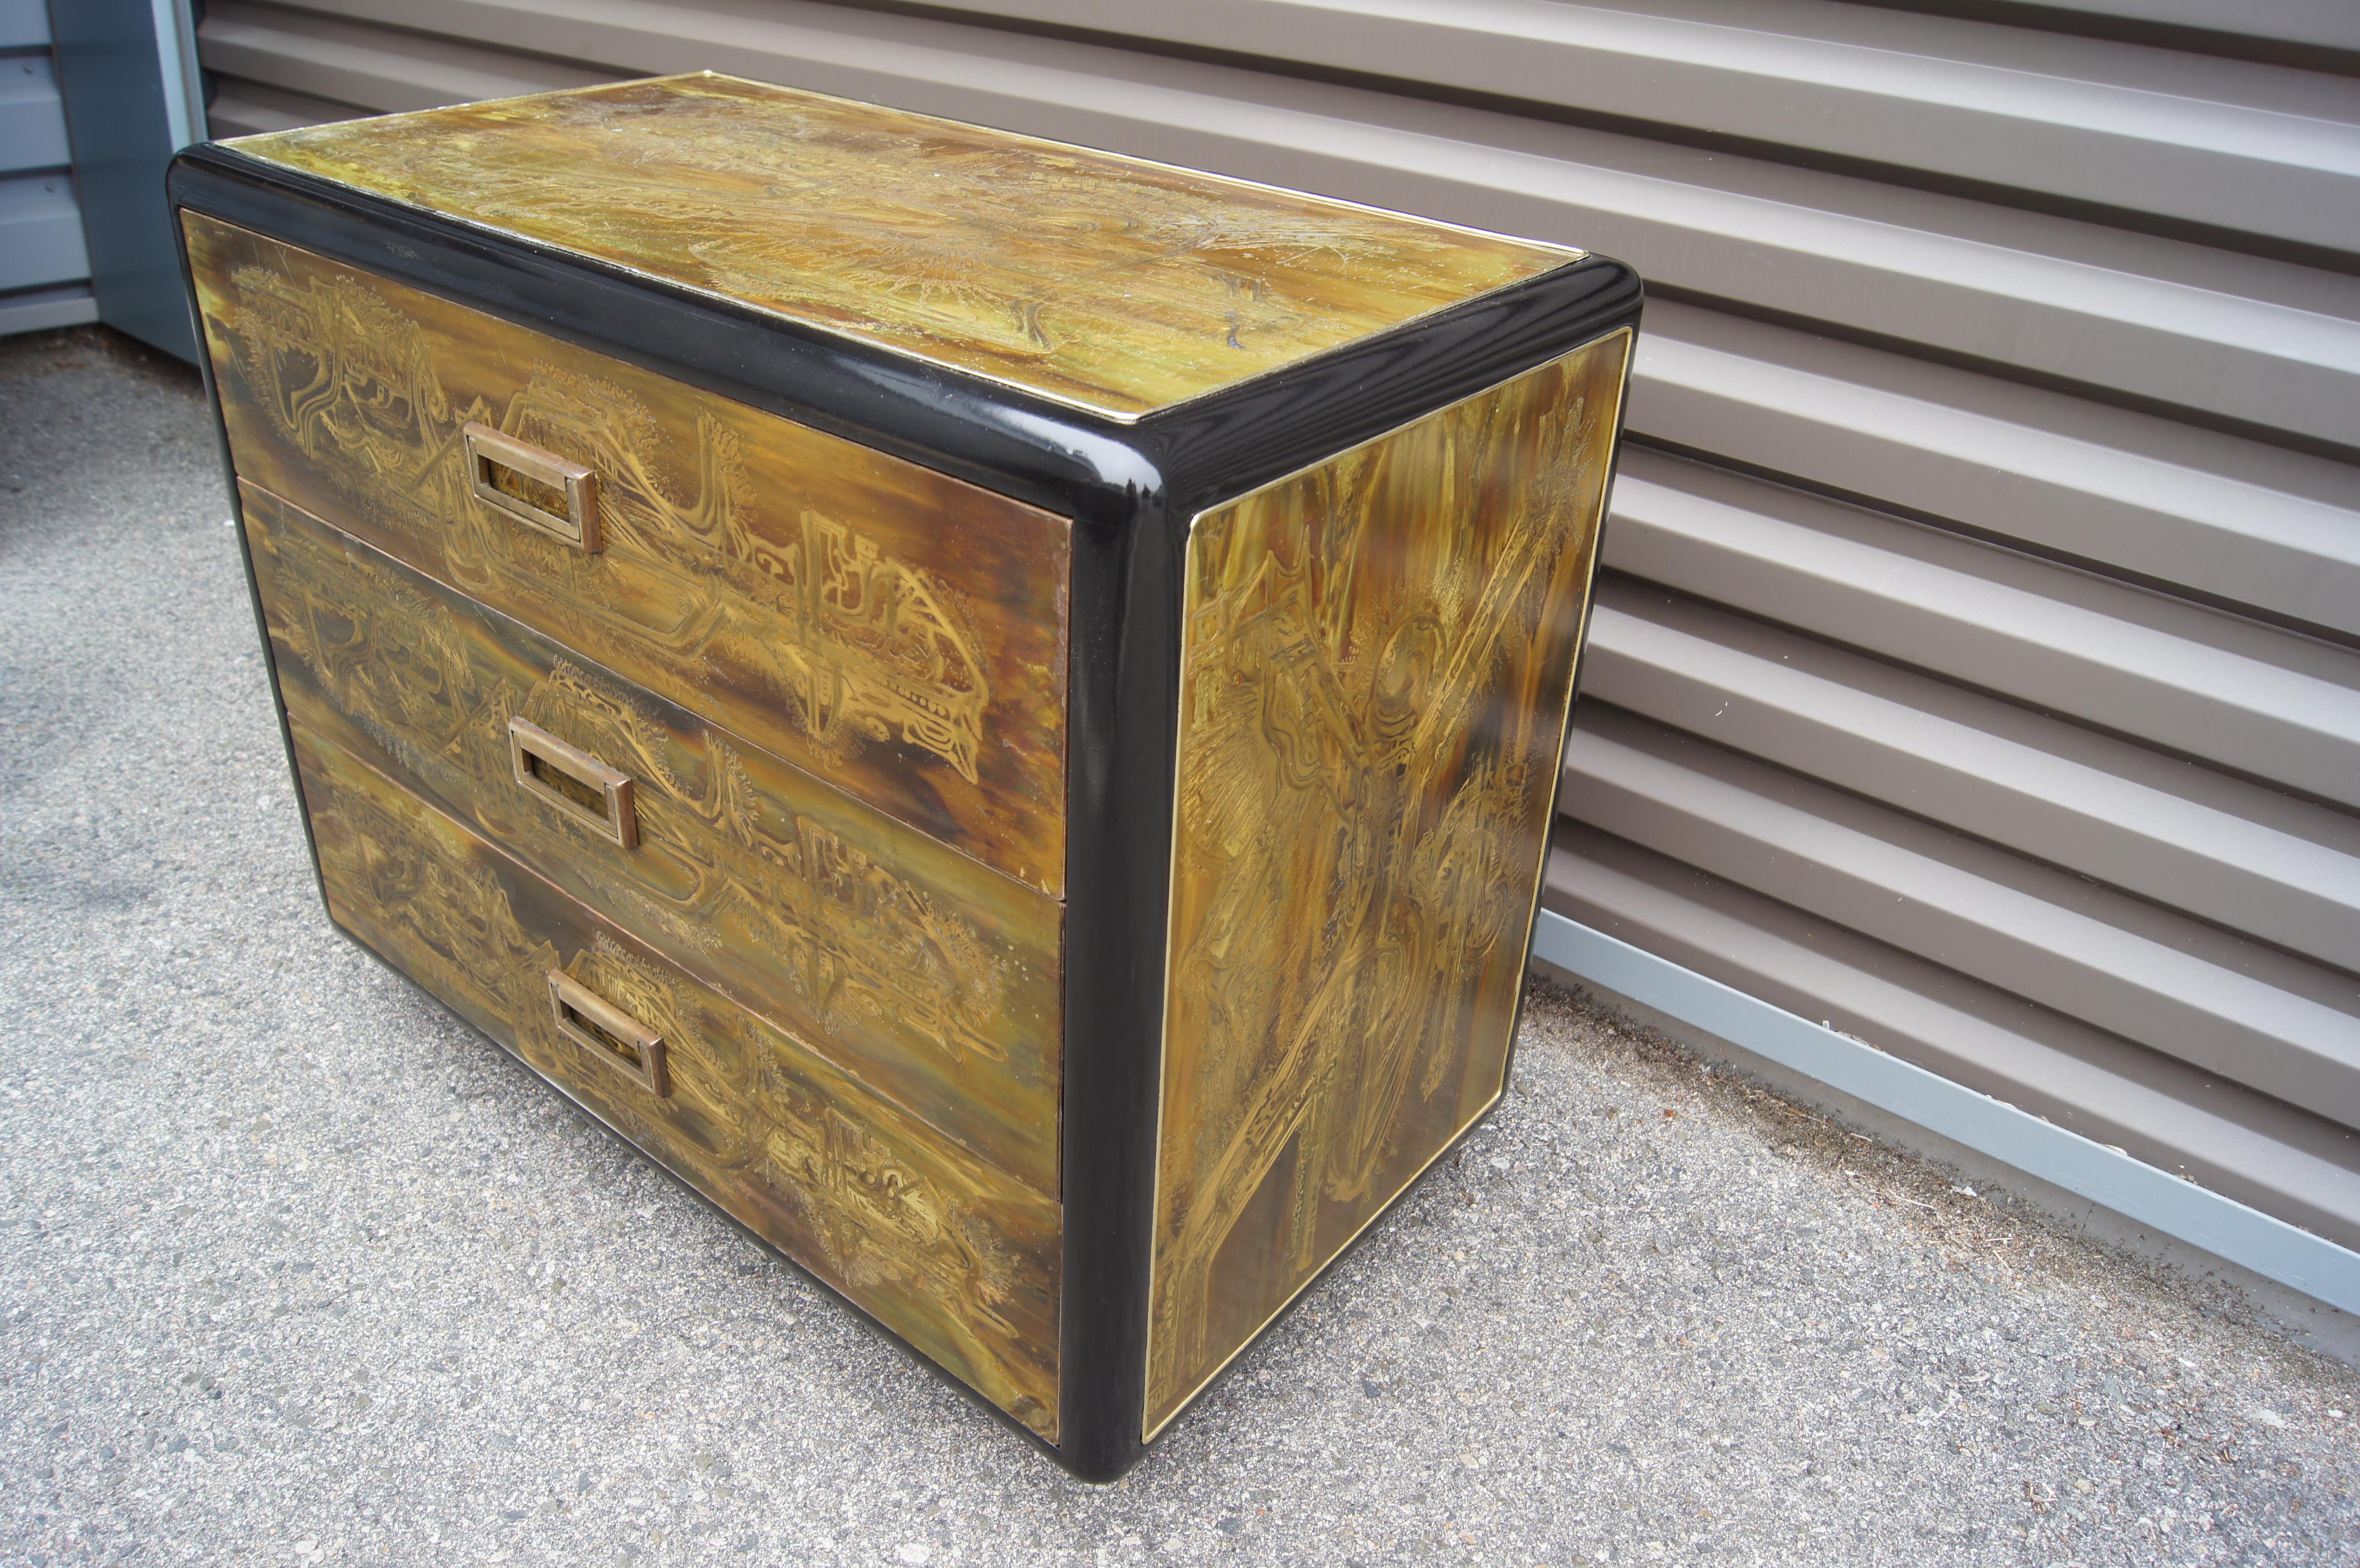 Small Acid-Etched Brass Chest of Drawers by Bernhard Rohne for Mastercraft In Good Condition For Sale In Dorchester, MA